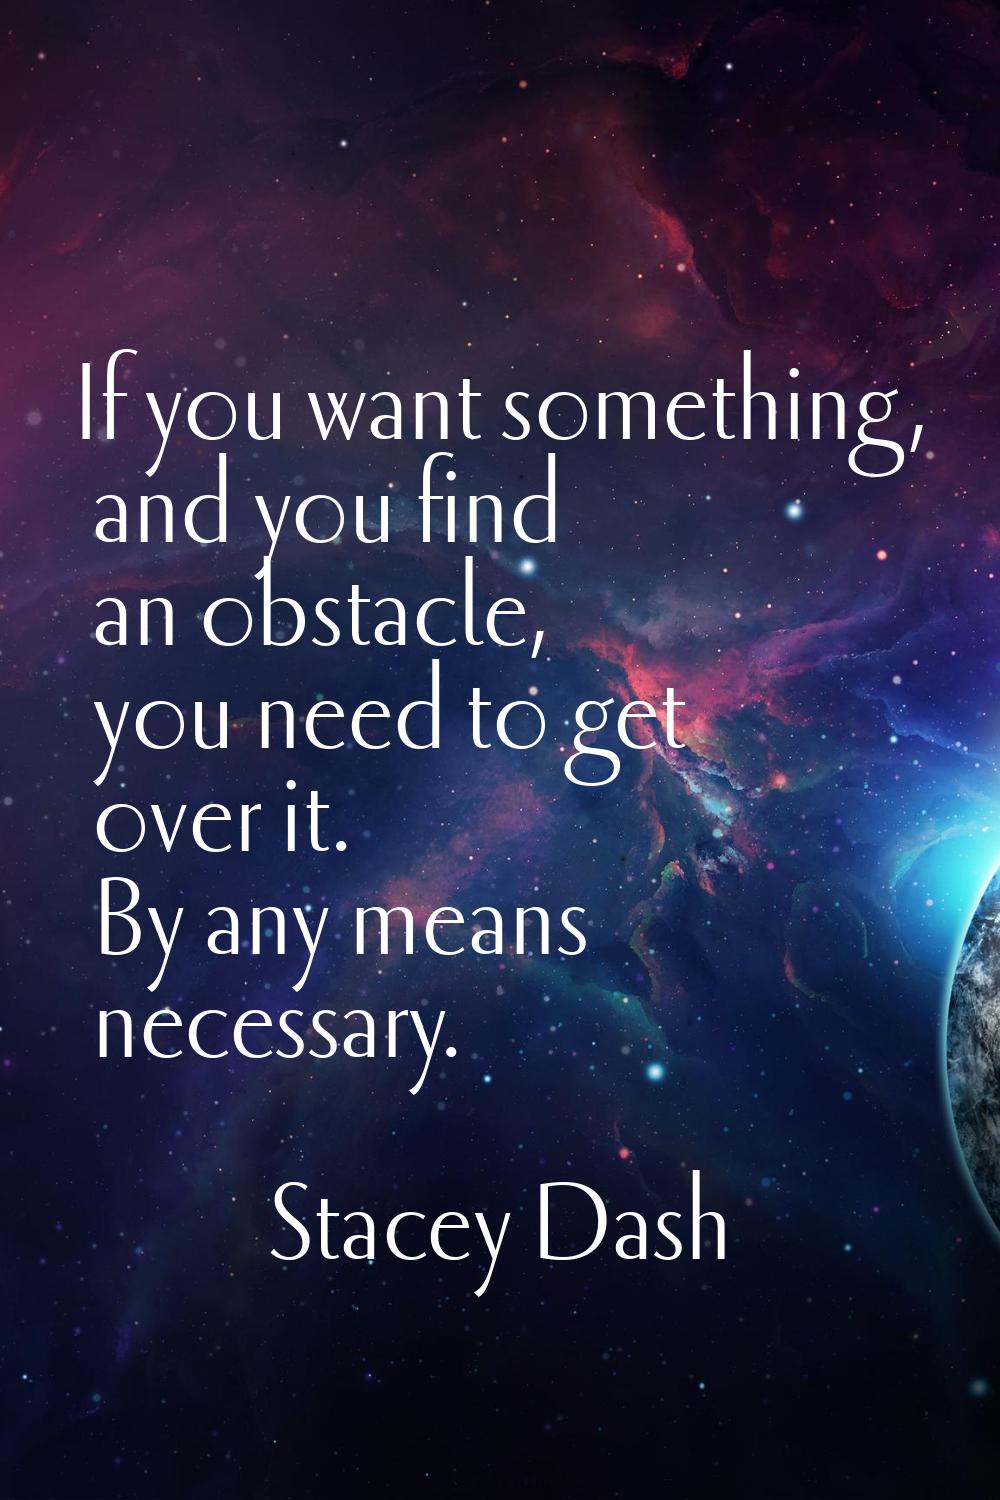 If you want something, and you find an obstacle, you need to get over it. By any means necessary.